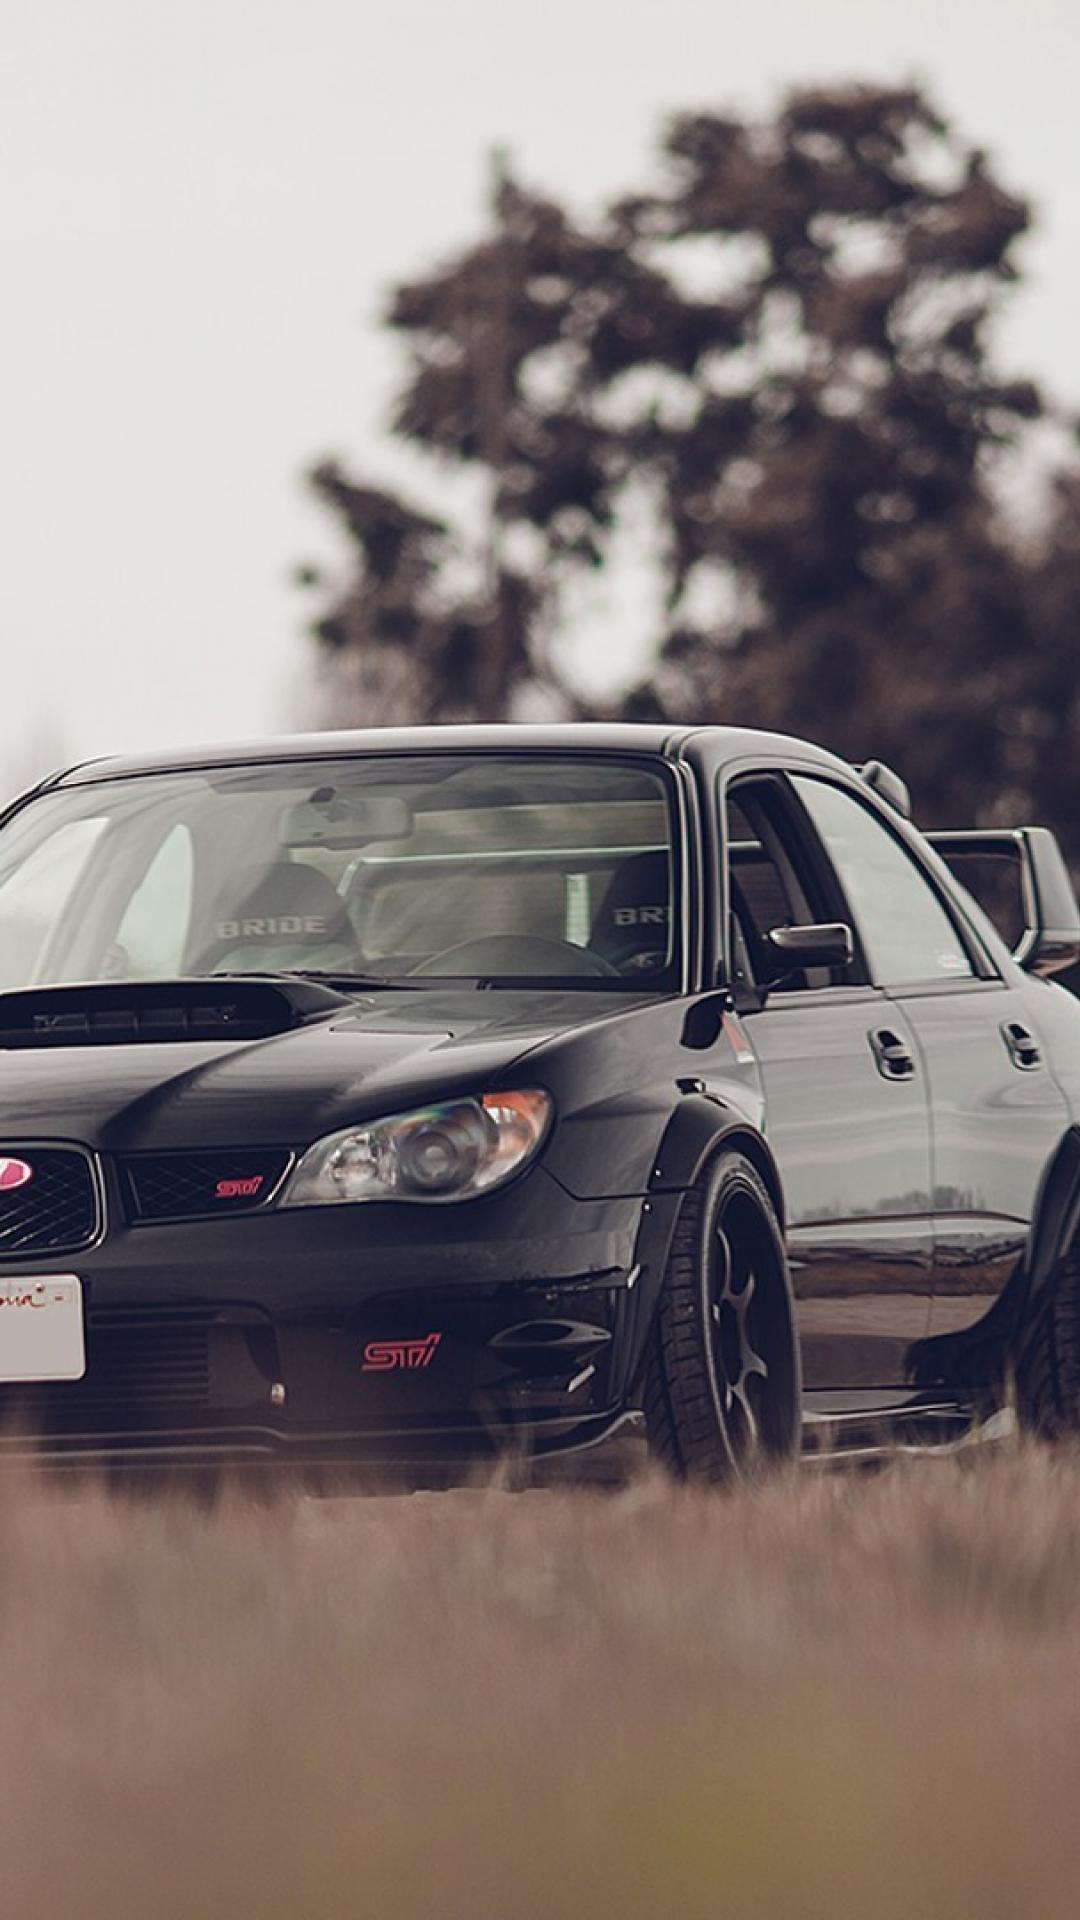 Wrx Photos Download The BEST Free Wrx Stock Photos  HD Images